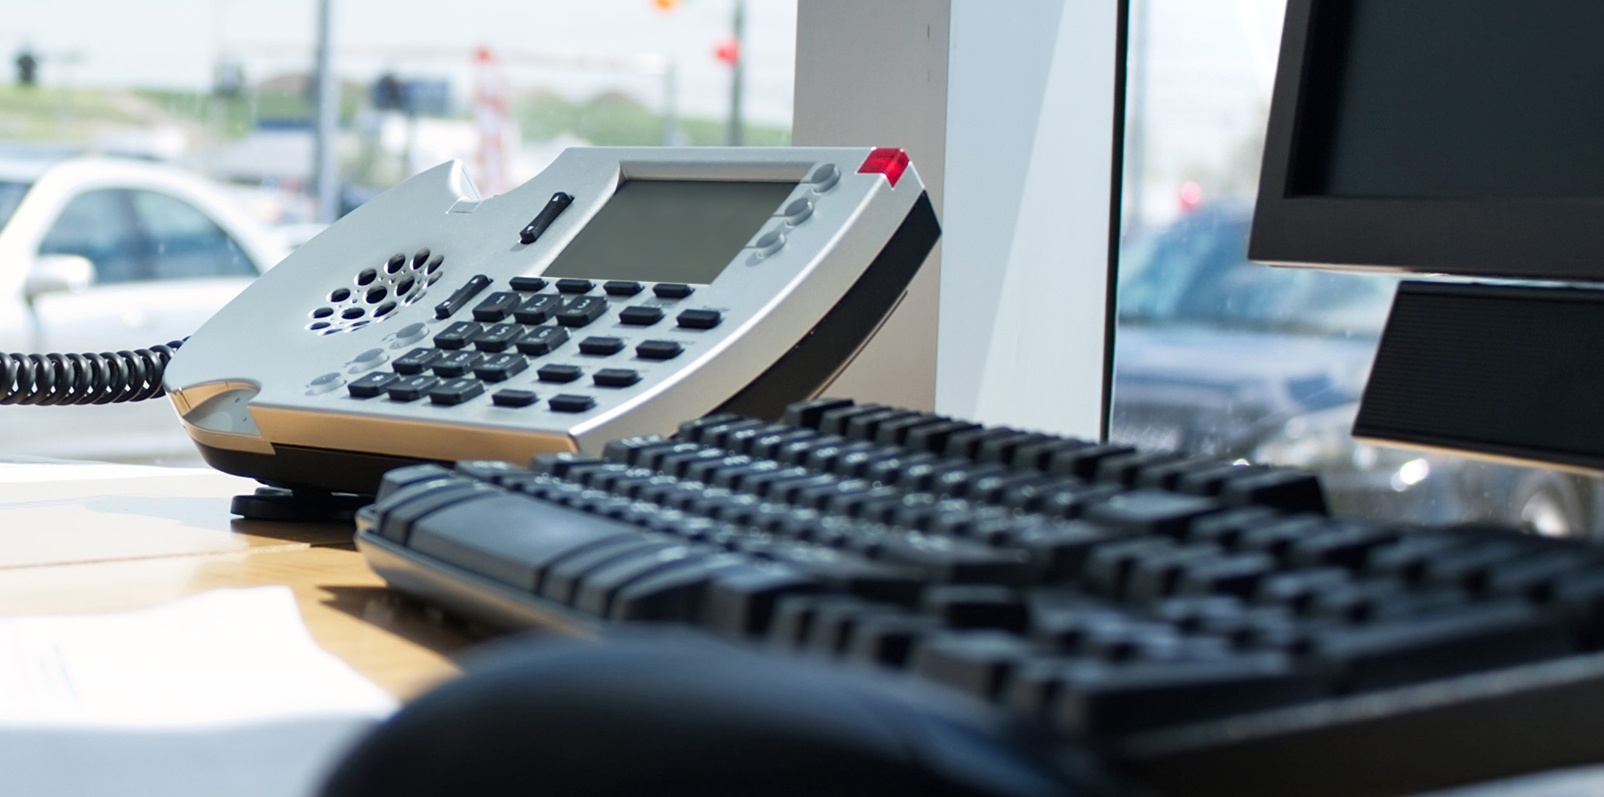 3-Things-to-Do-When-Considering-a-VoIP-System-2.jpg